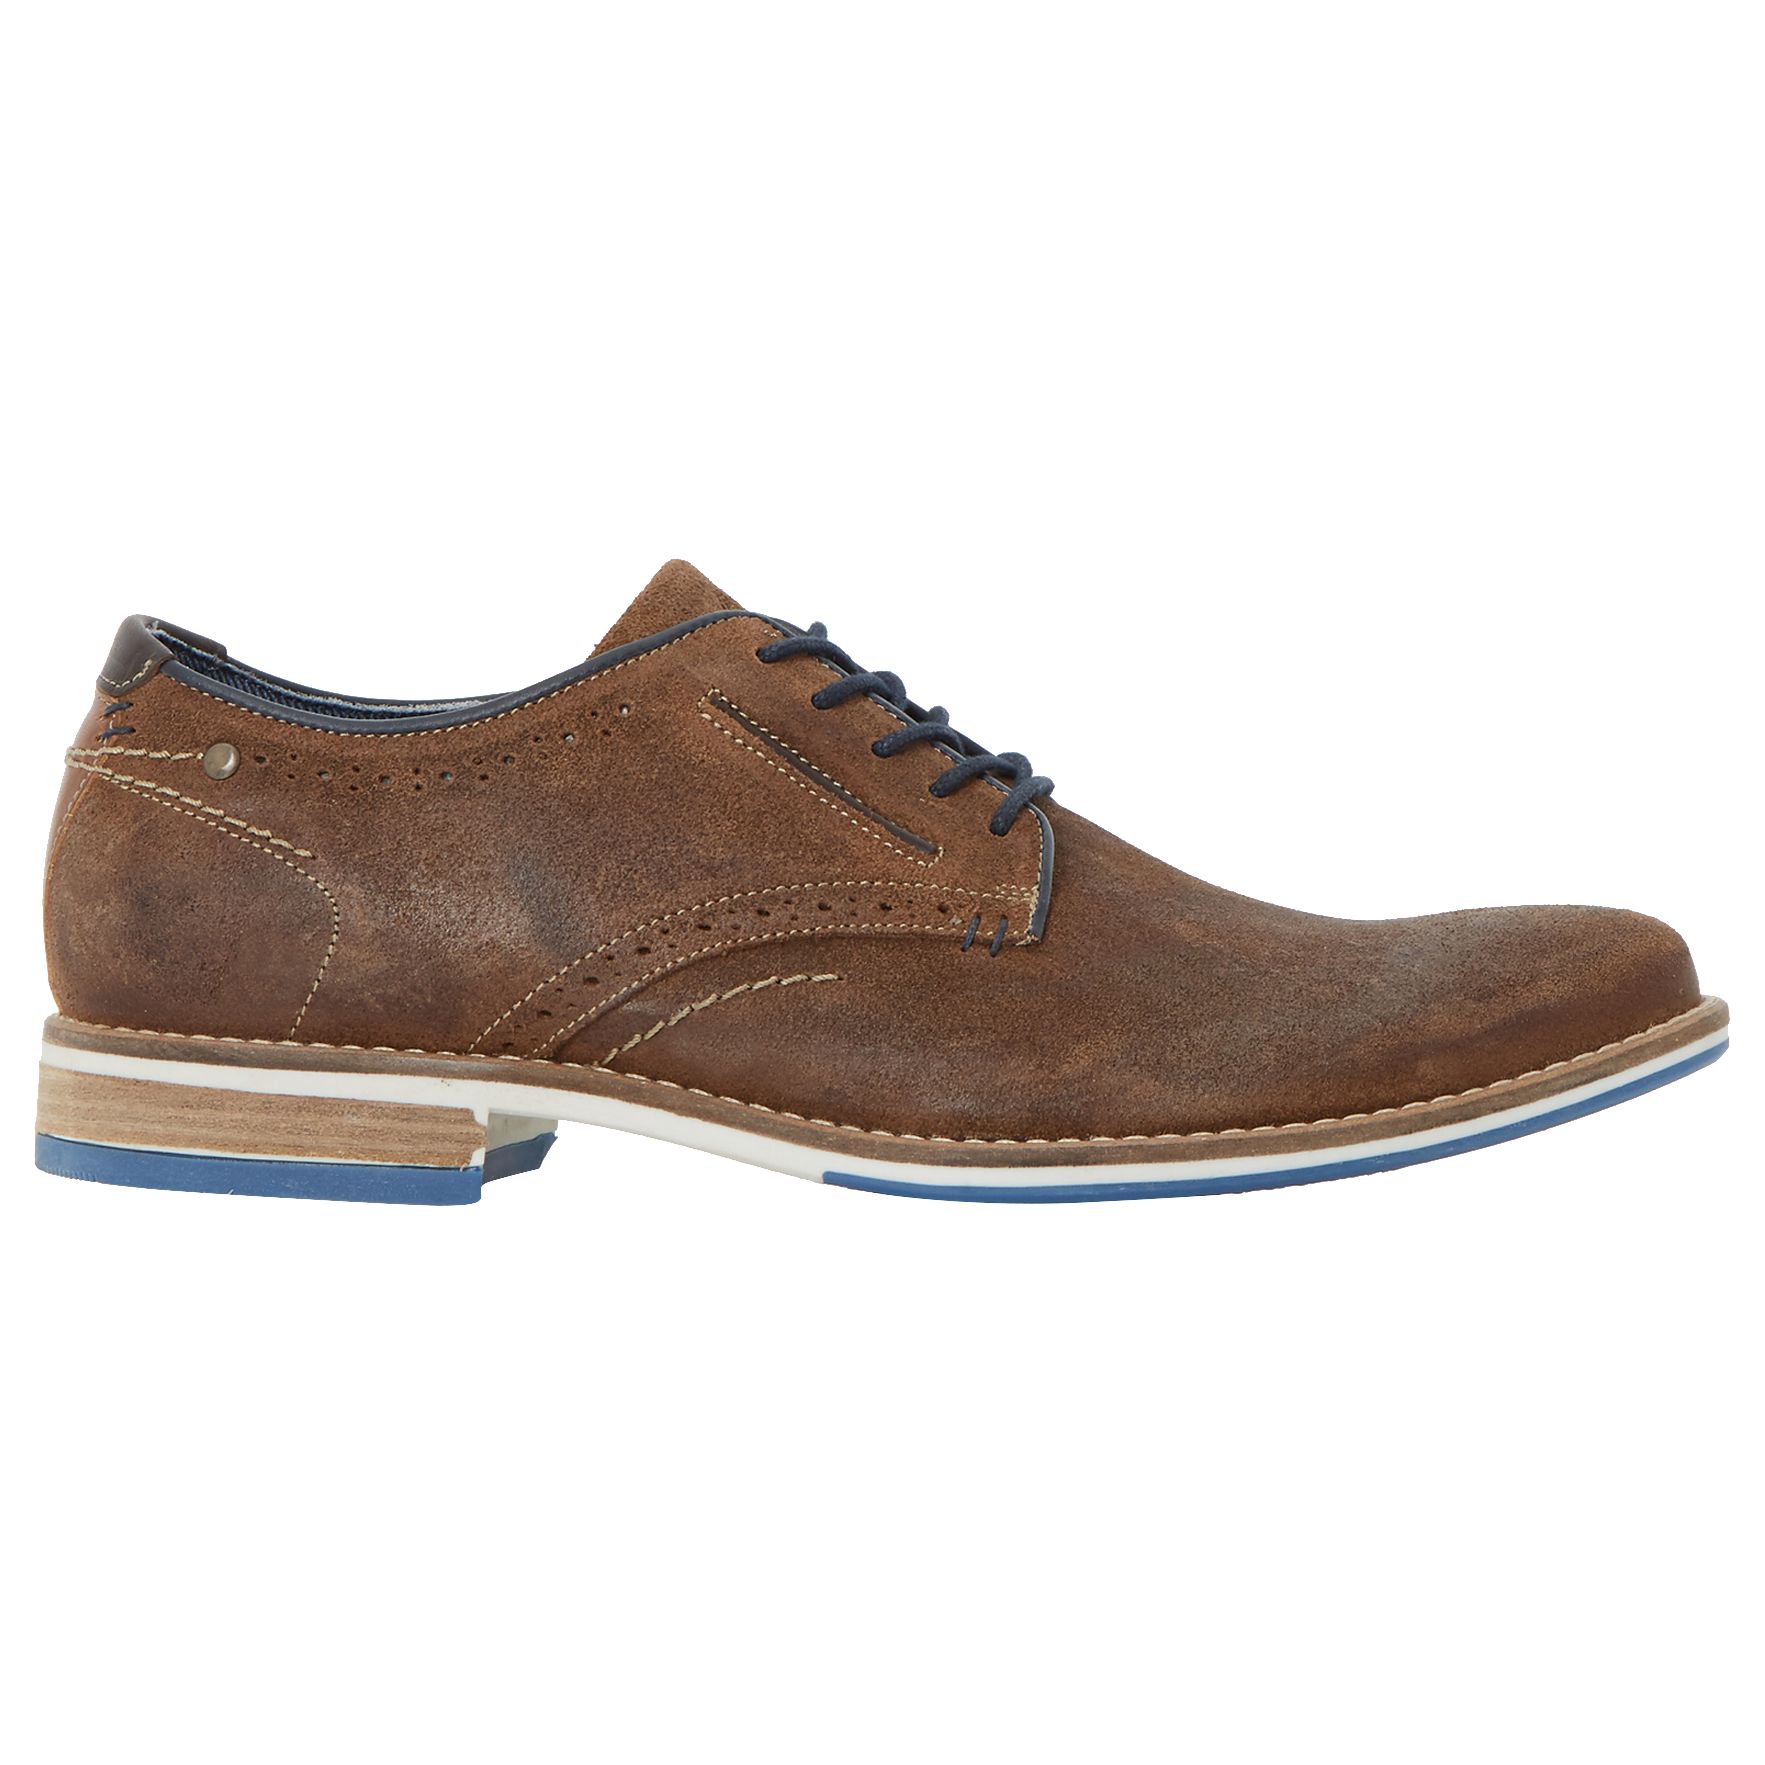 Dune Brewer Gibson Suede Shoes, Tan Suede, 7